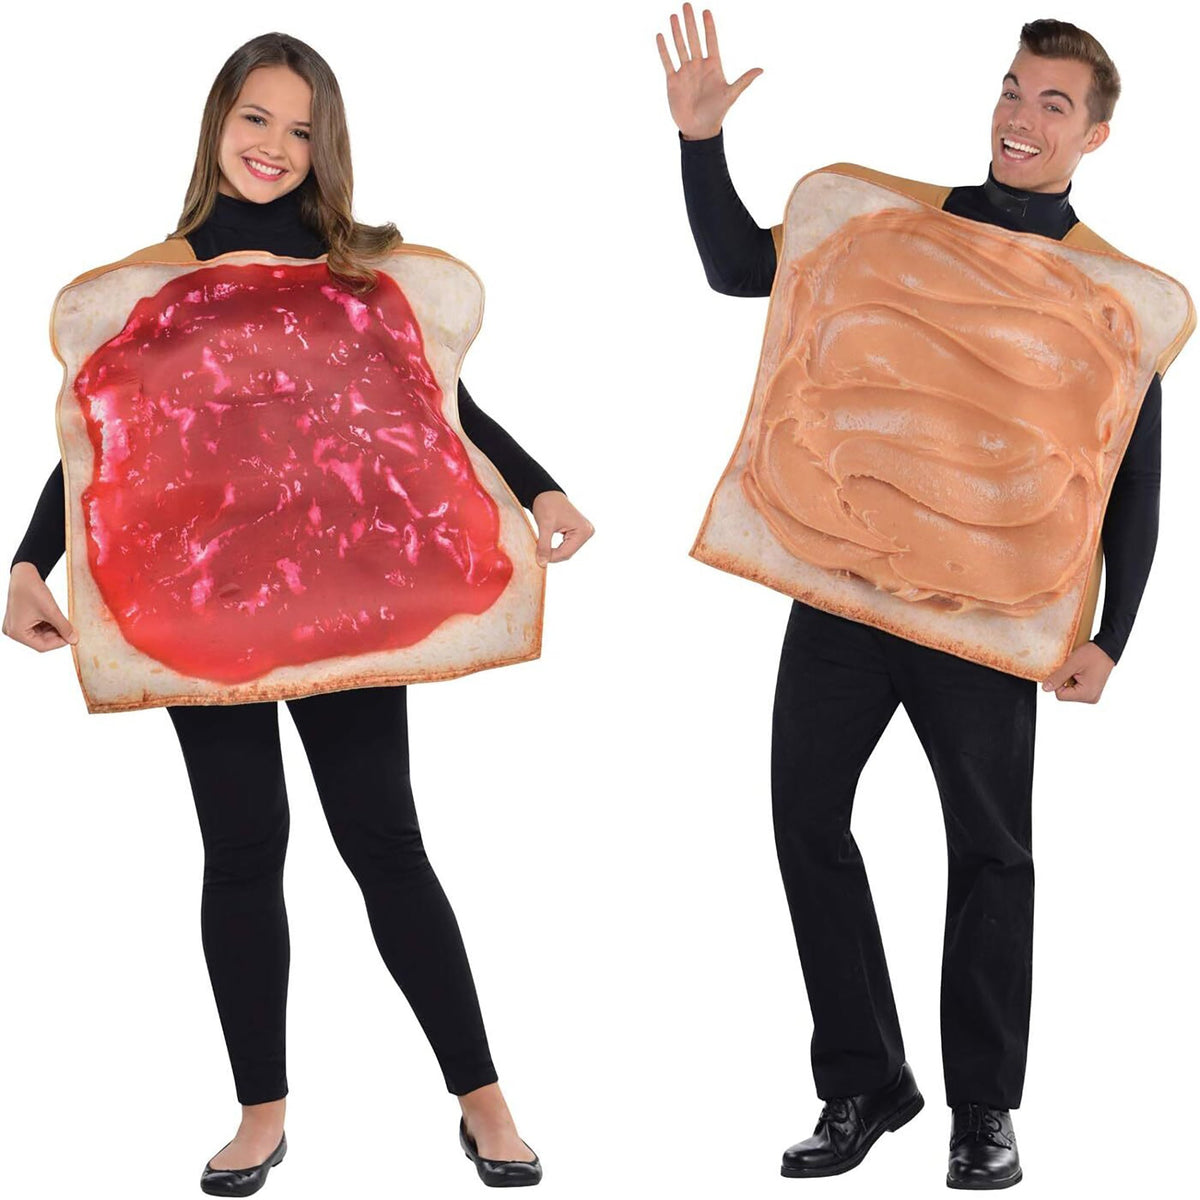 SUIT YOURSELF COSTUME CO. Costumes Peanut Butter and Jelly Costume for Adults